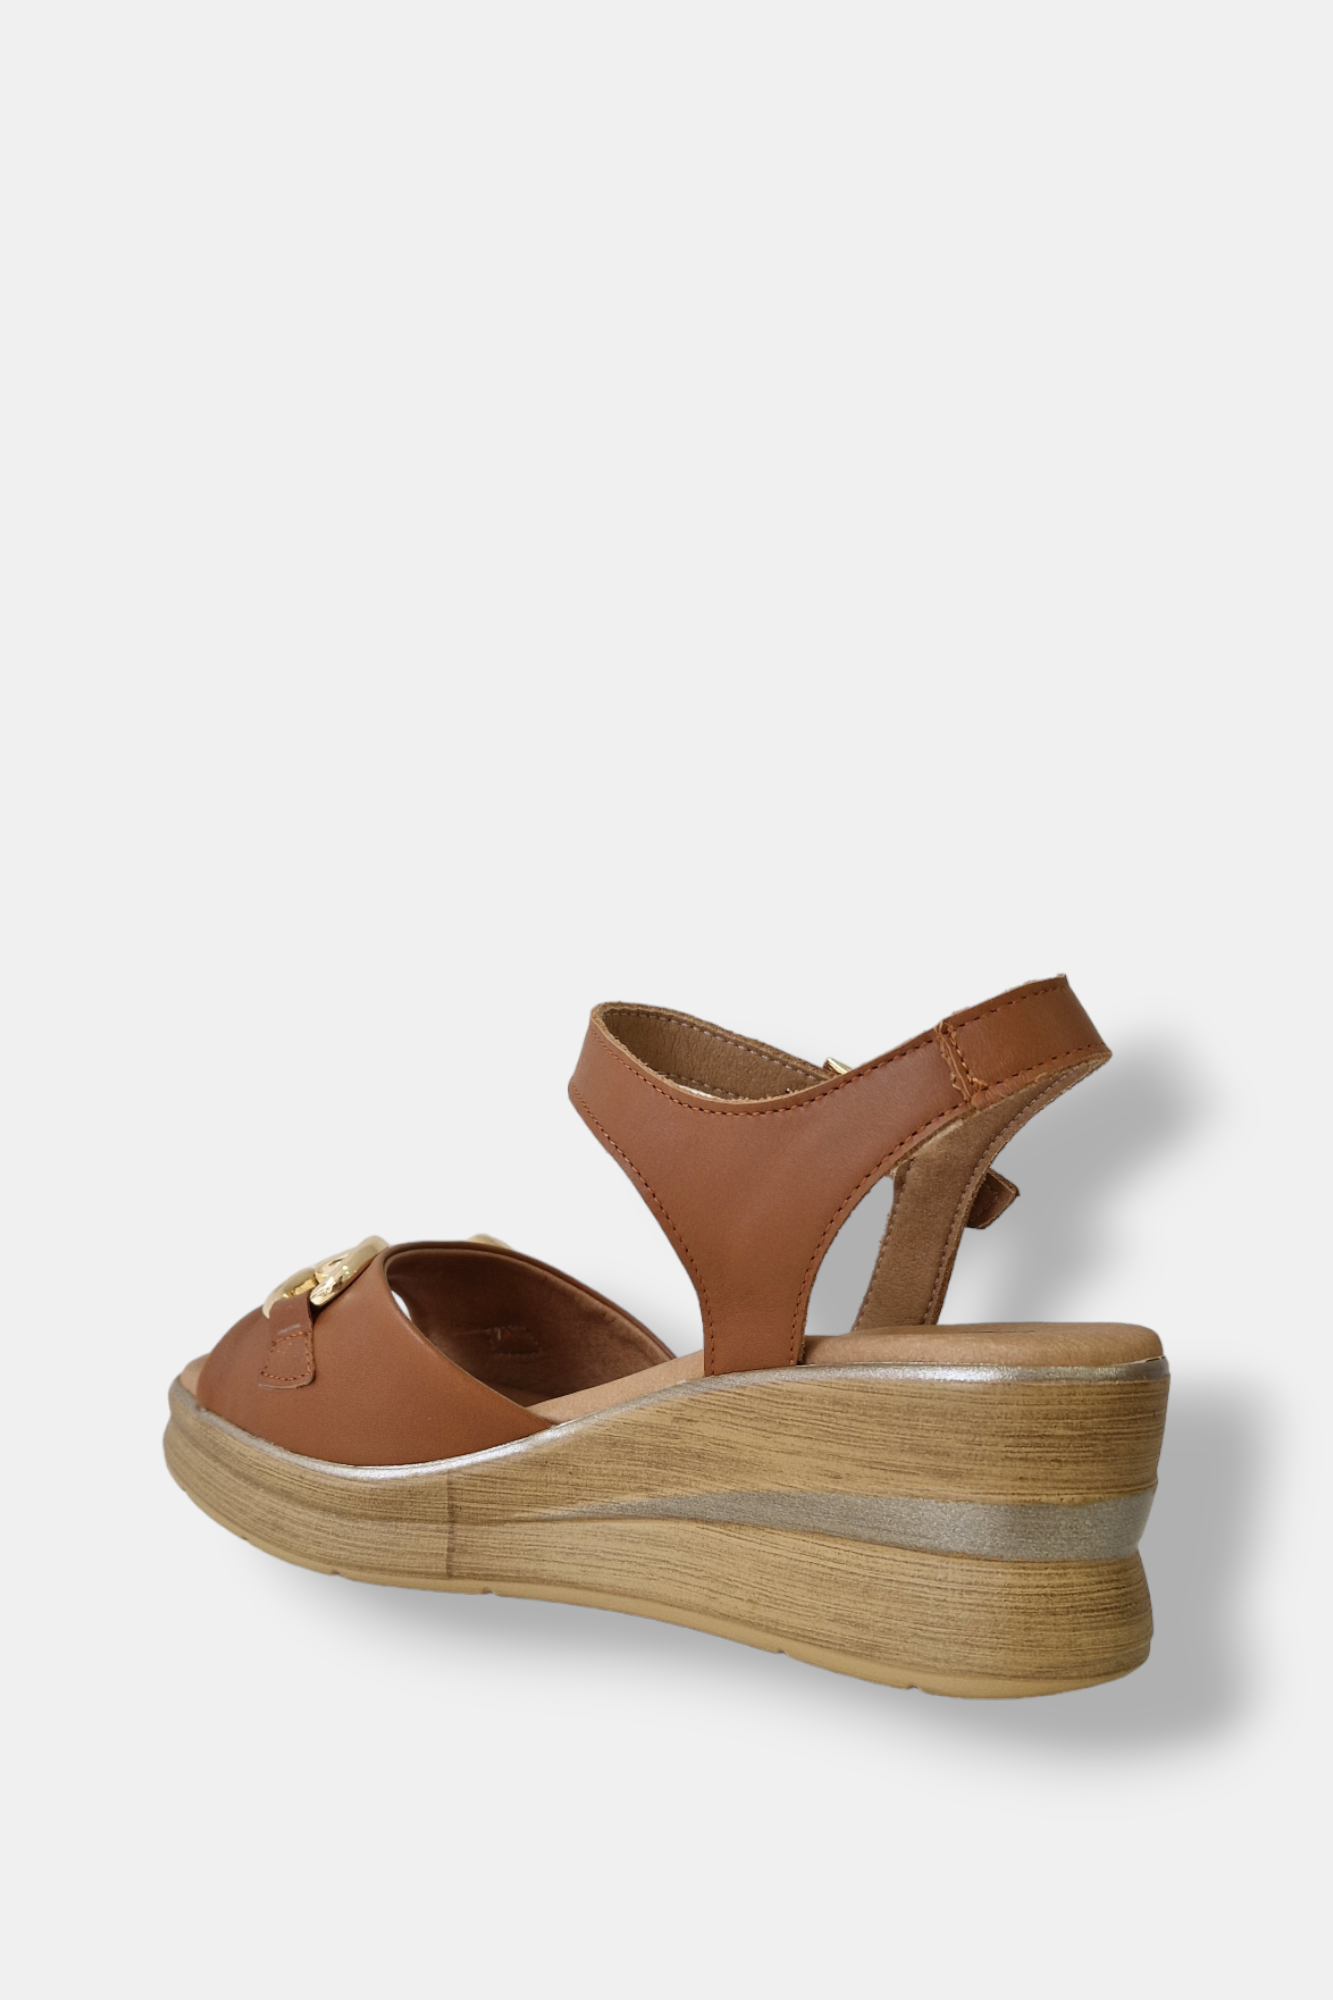 PITILLOS 5601 TAN LEATHER WEDGES